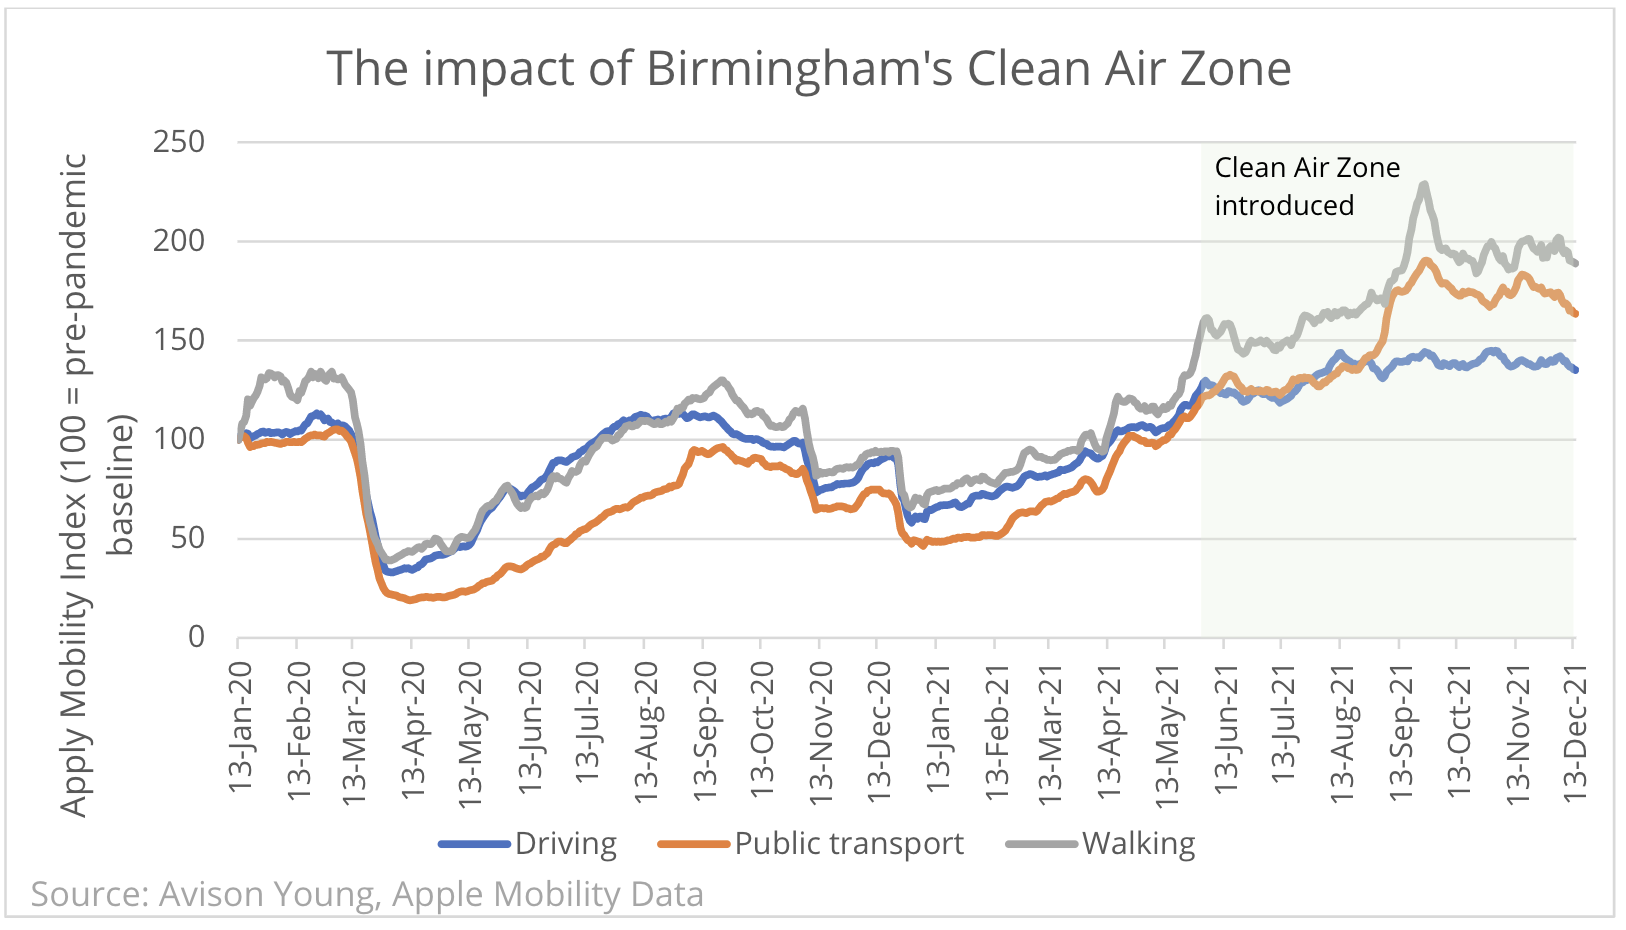 Birmingham's clean air zone has made a real difference